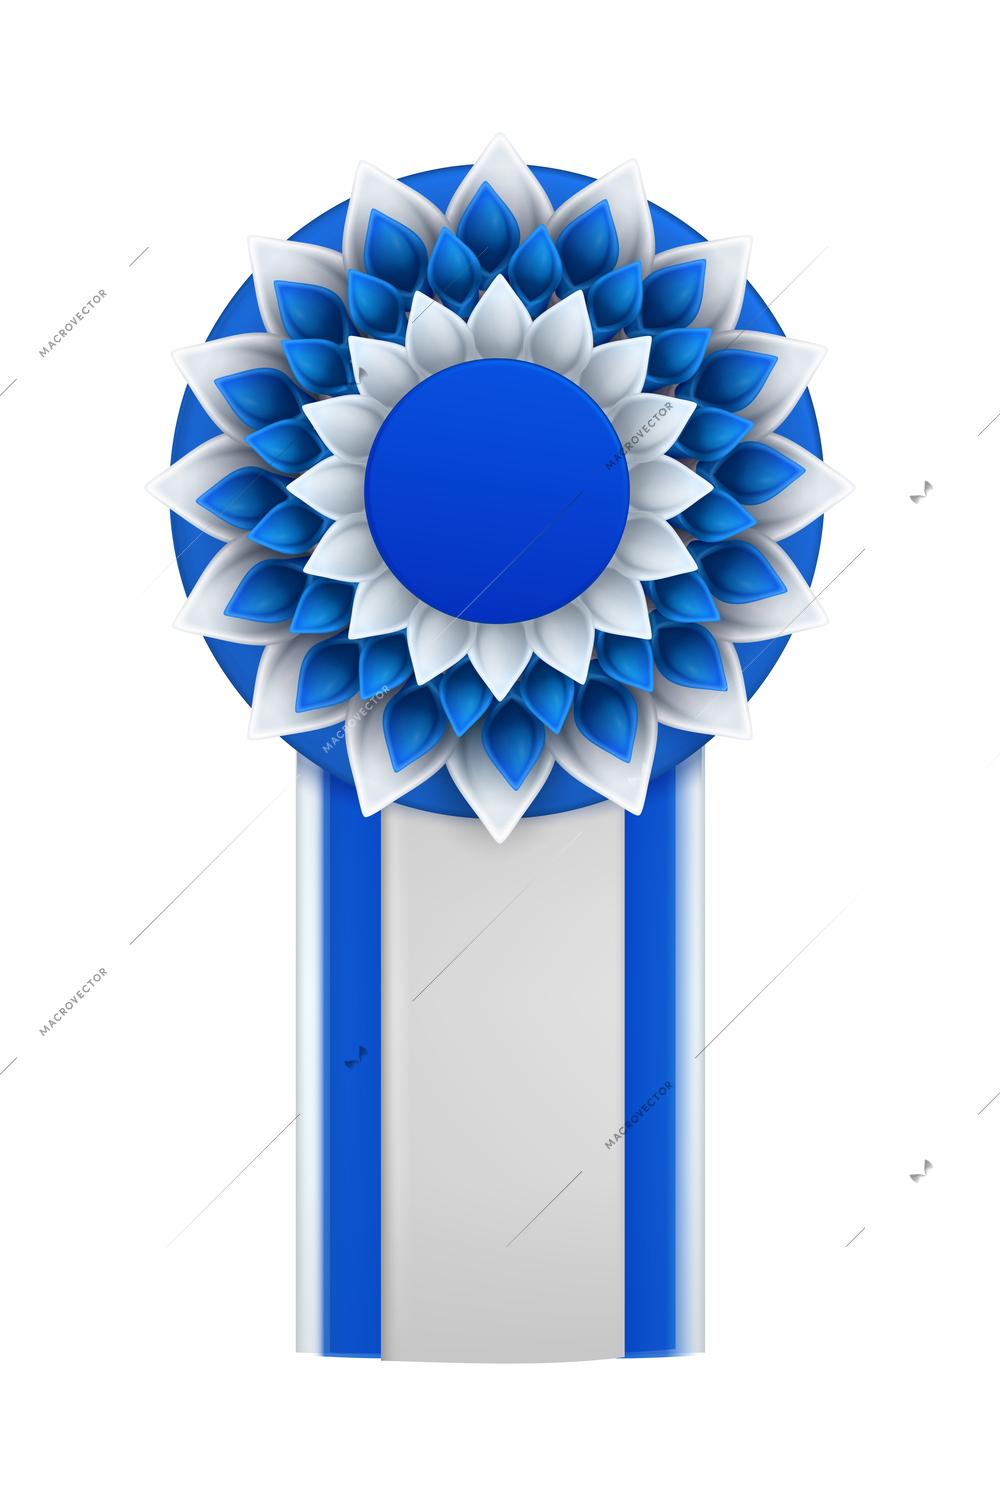 Blue badges rosettes award realistic composition with isolated view of ornate paper badge vector illustration